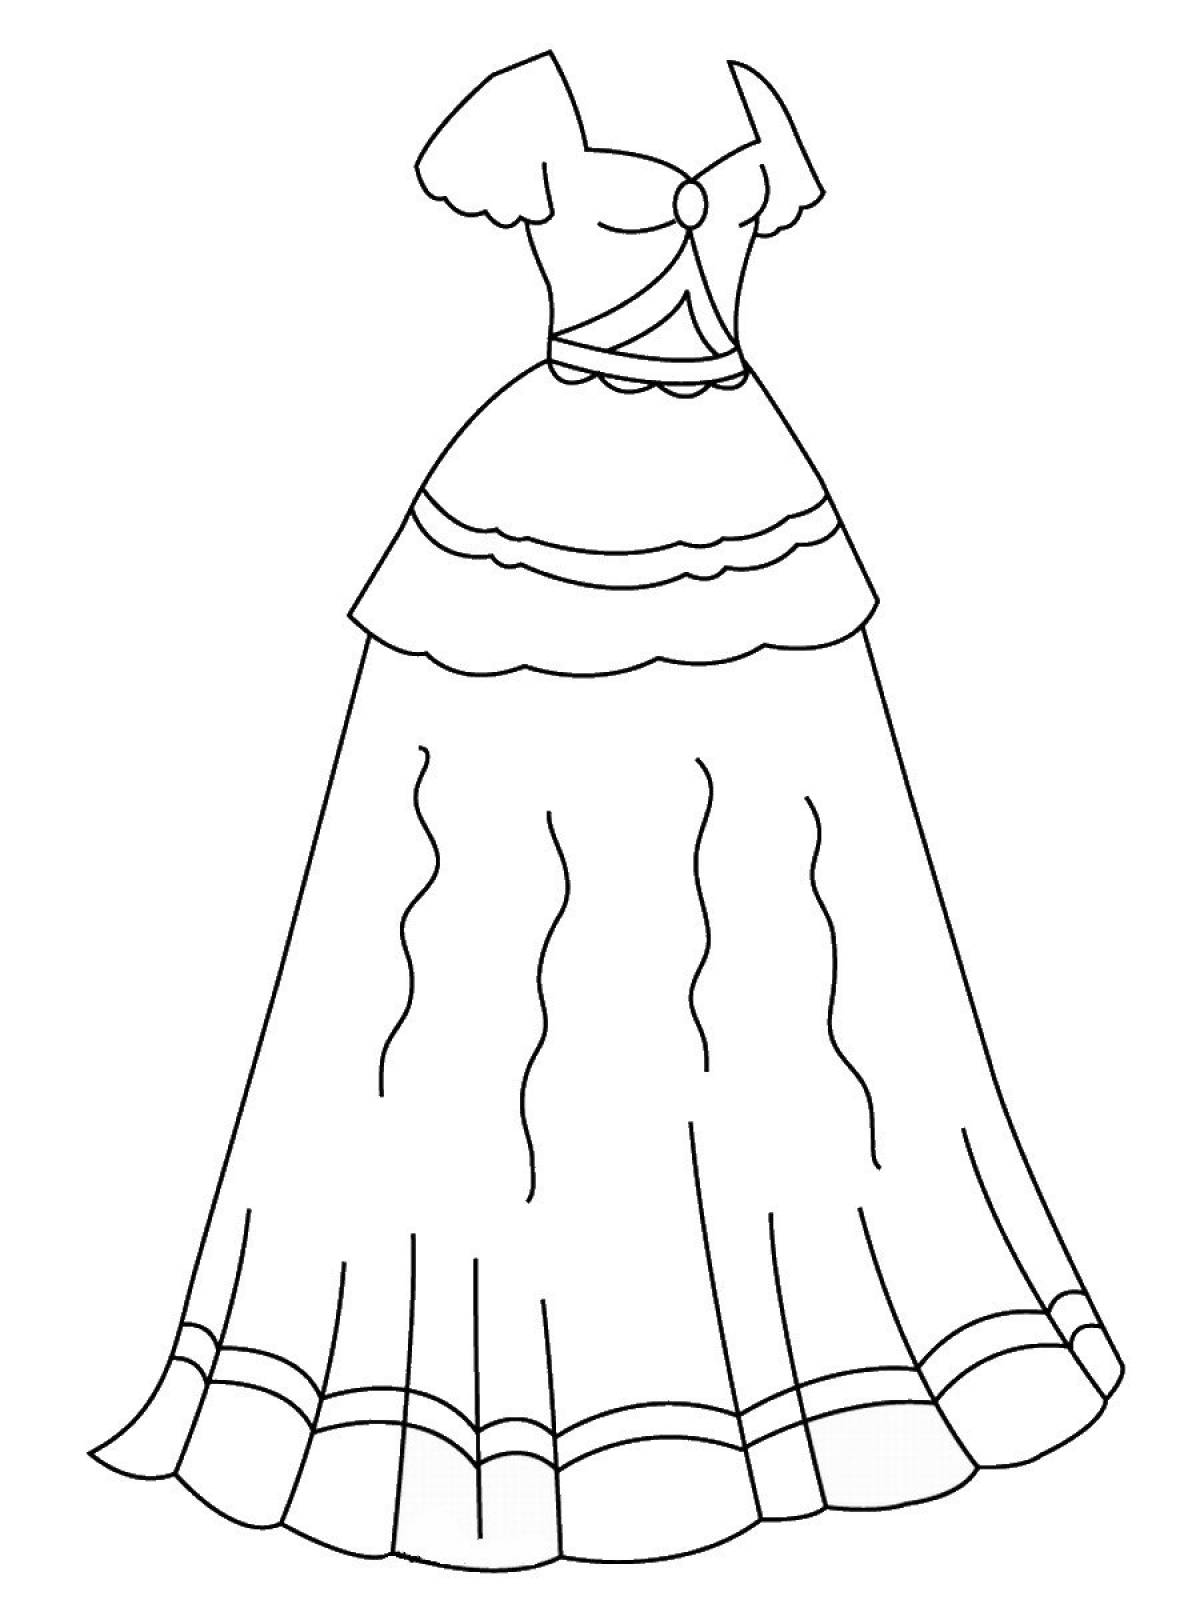 Coloring page puffy doll dress for children 4-5 years old